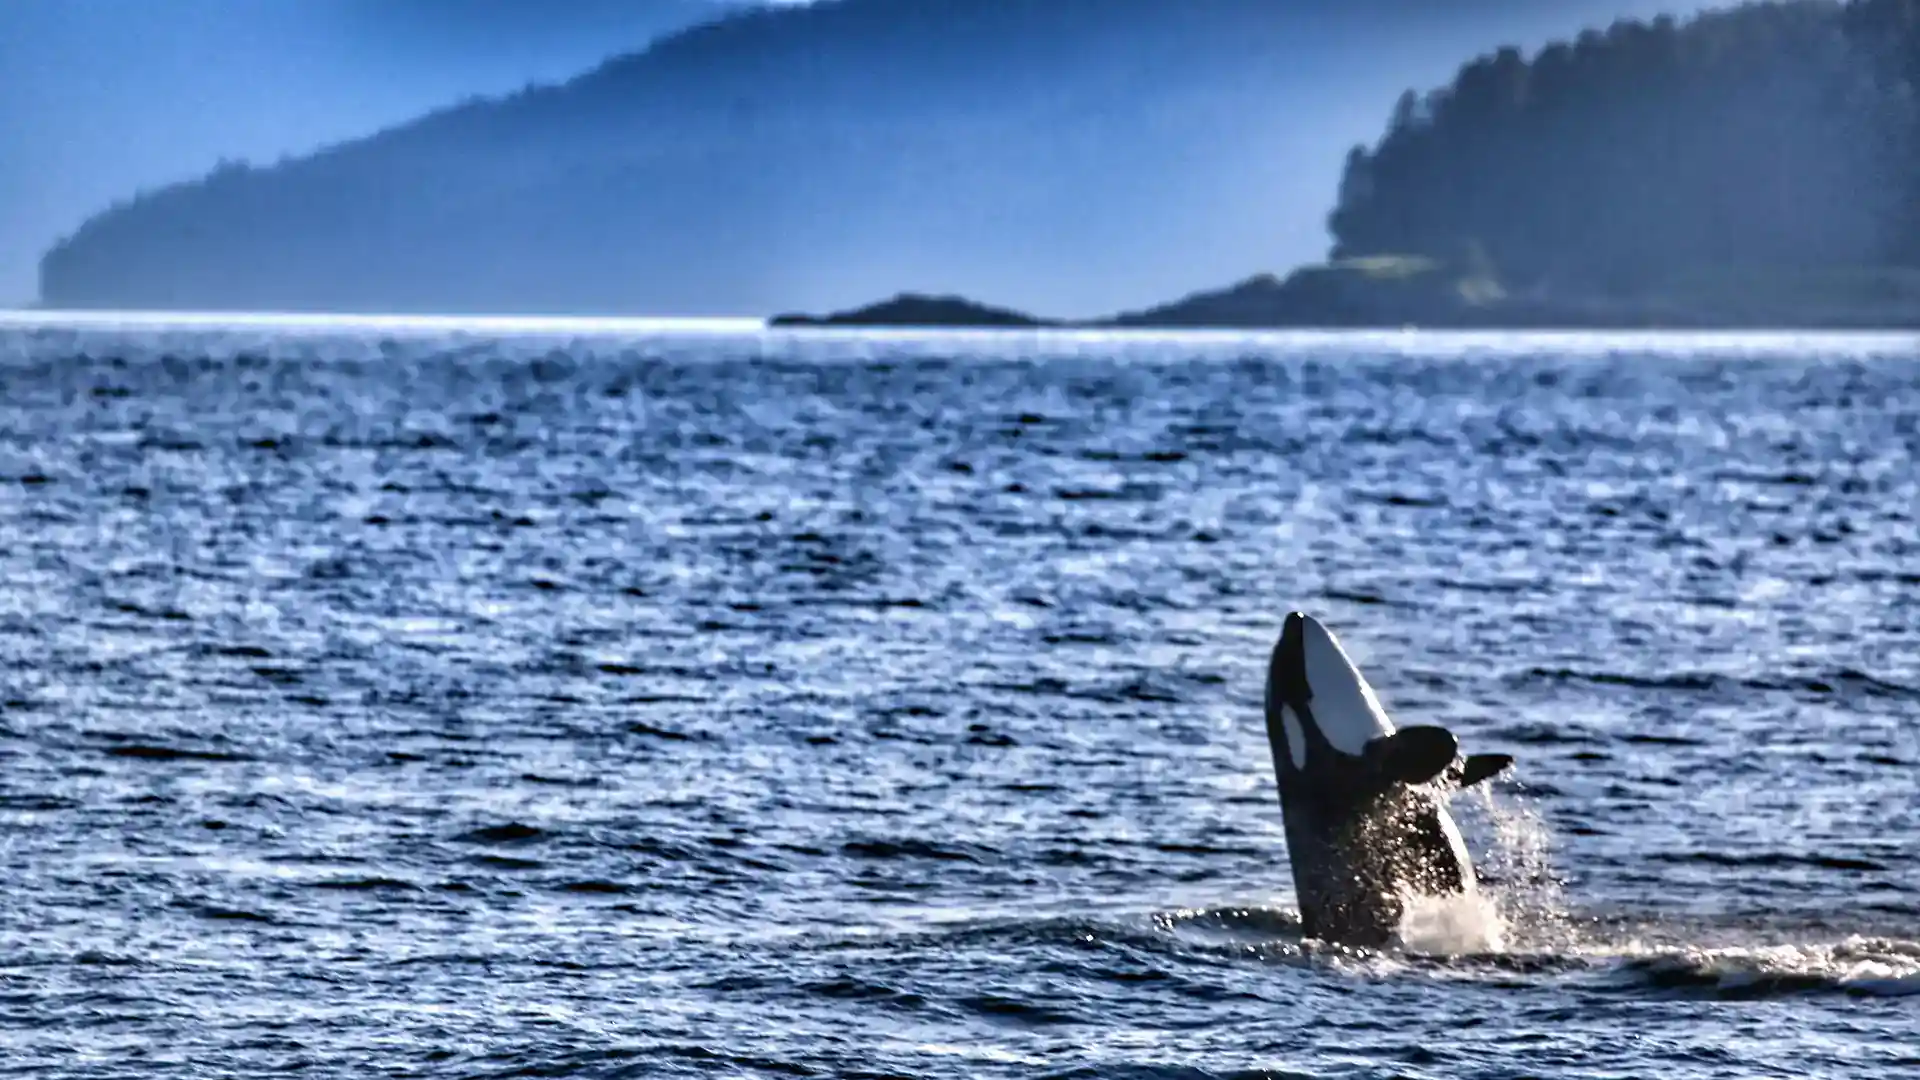 View of orca whale breaching through Alaska waters.